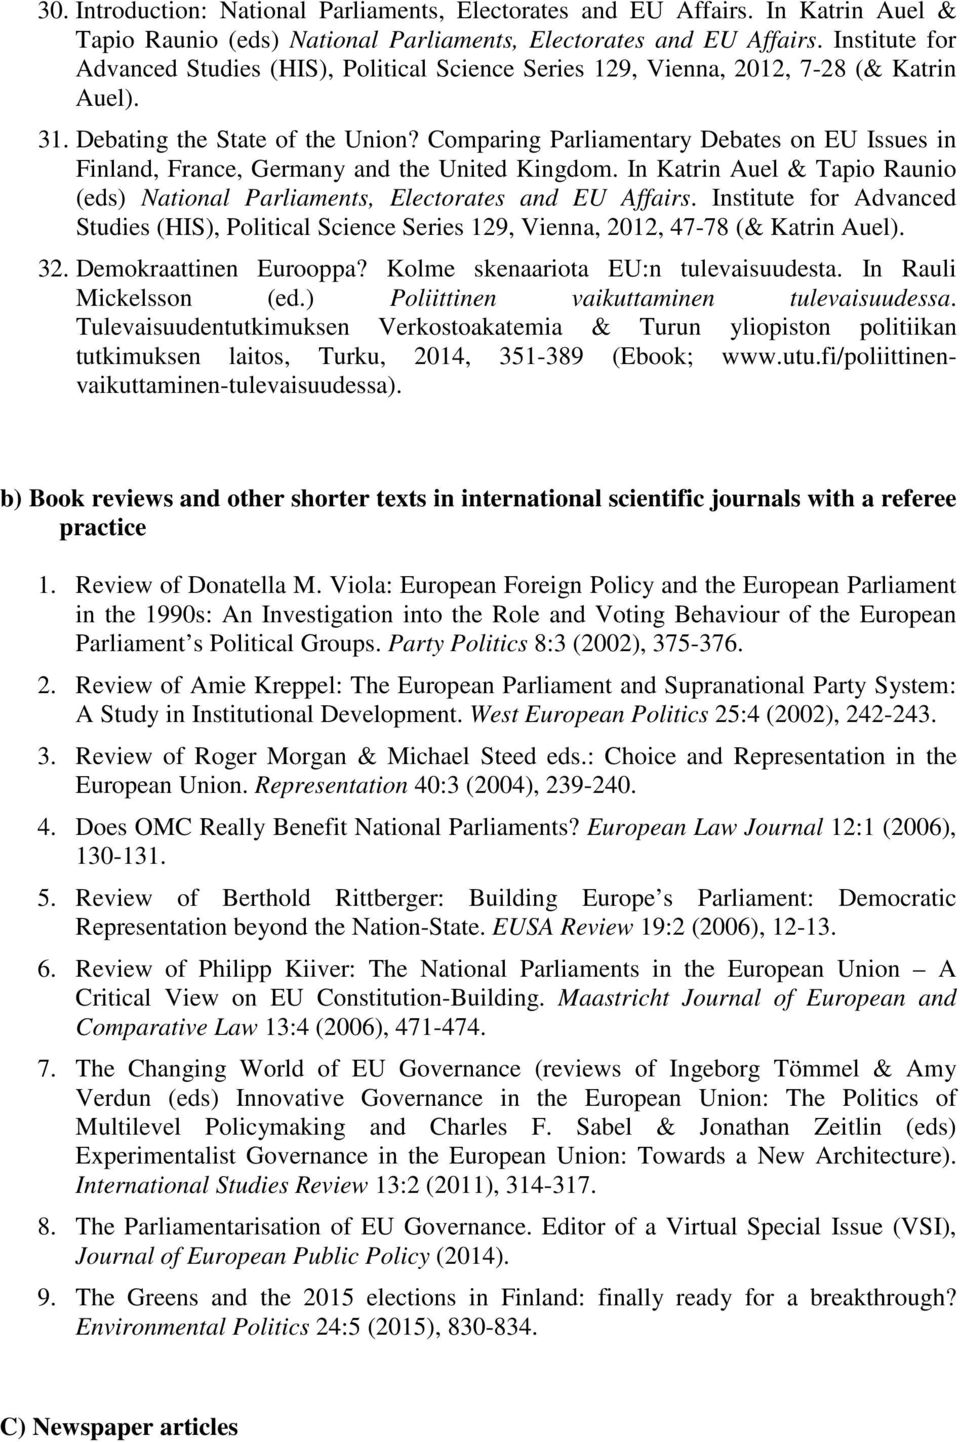 Comparing Parliamentary Debates on EU Issues in Finland, France, Germany and the United Kingdom. In Katrin Auel & Tapio Raunio (eds) National Parliaments, Electorates and EU Affairs.